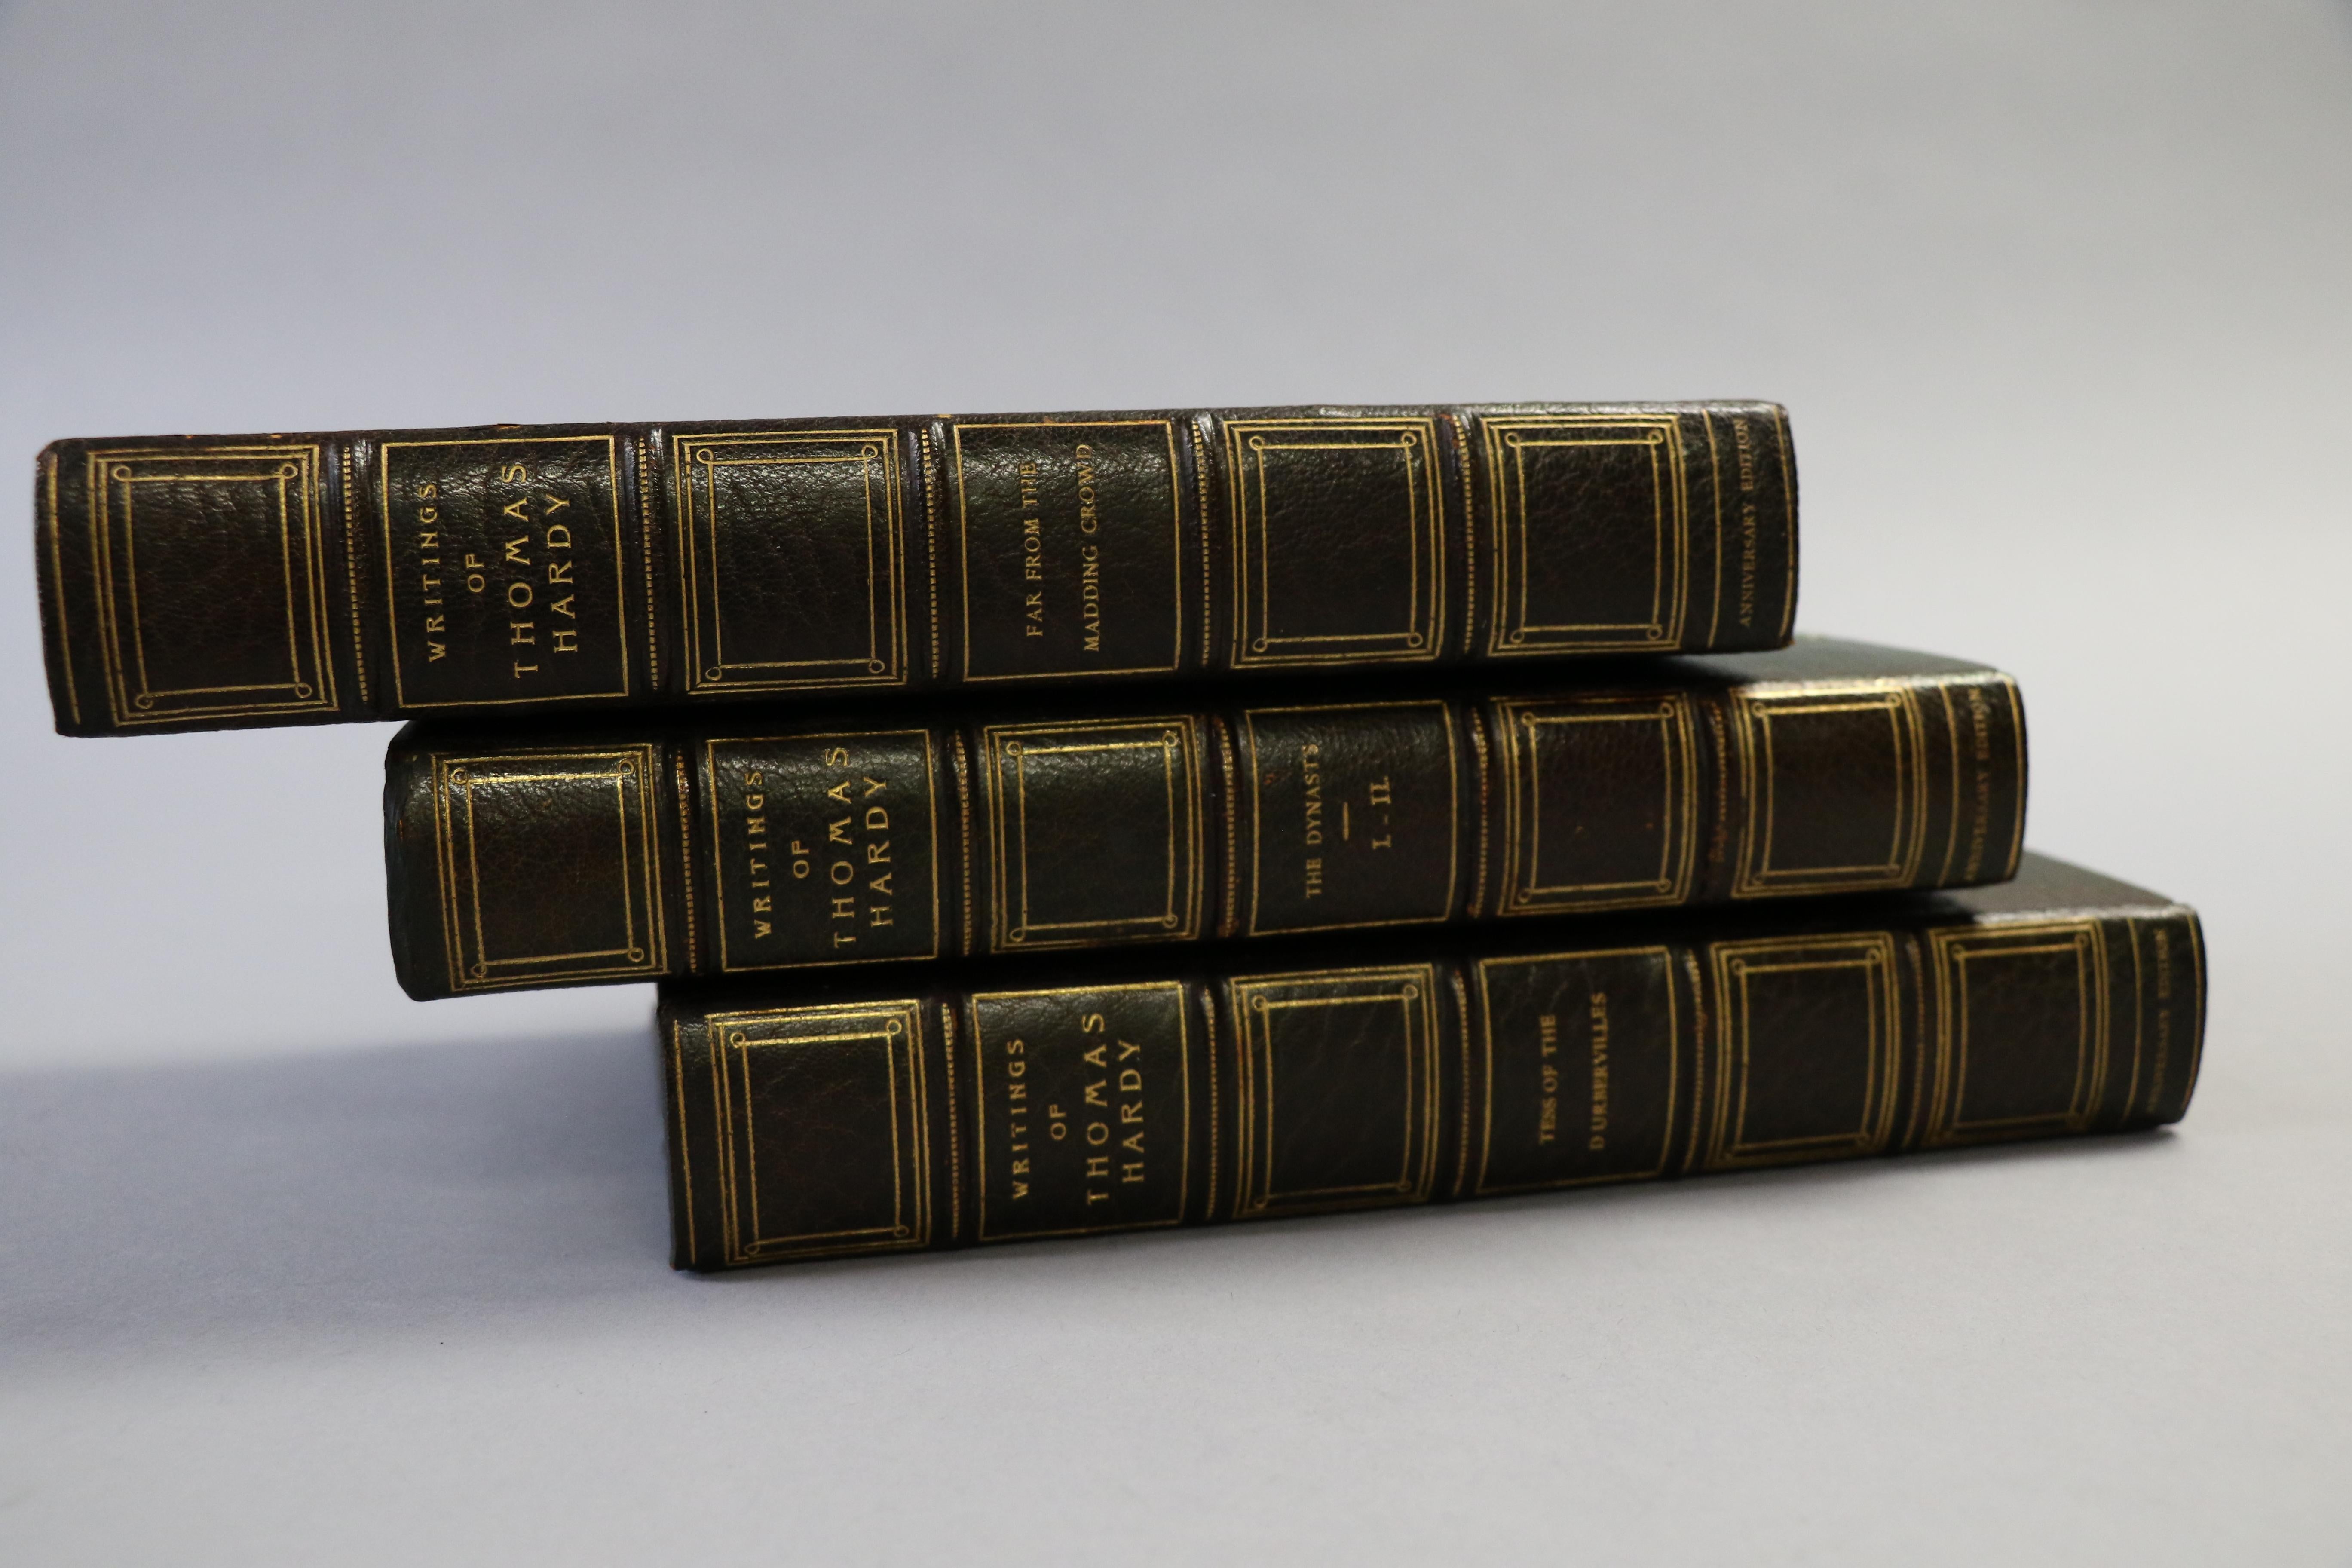 21 volume Anniversary Edition. Bound in 3/4 green Morocco with top edges gilt, raised bands, and gilt panels. Published in New York by Harper and Brothers; ND, circa 1900s.